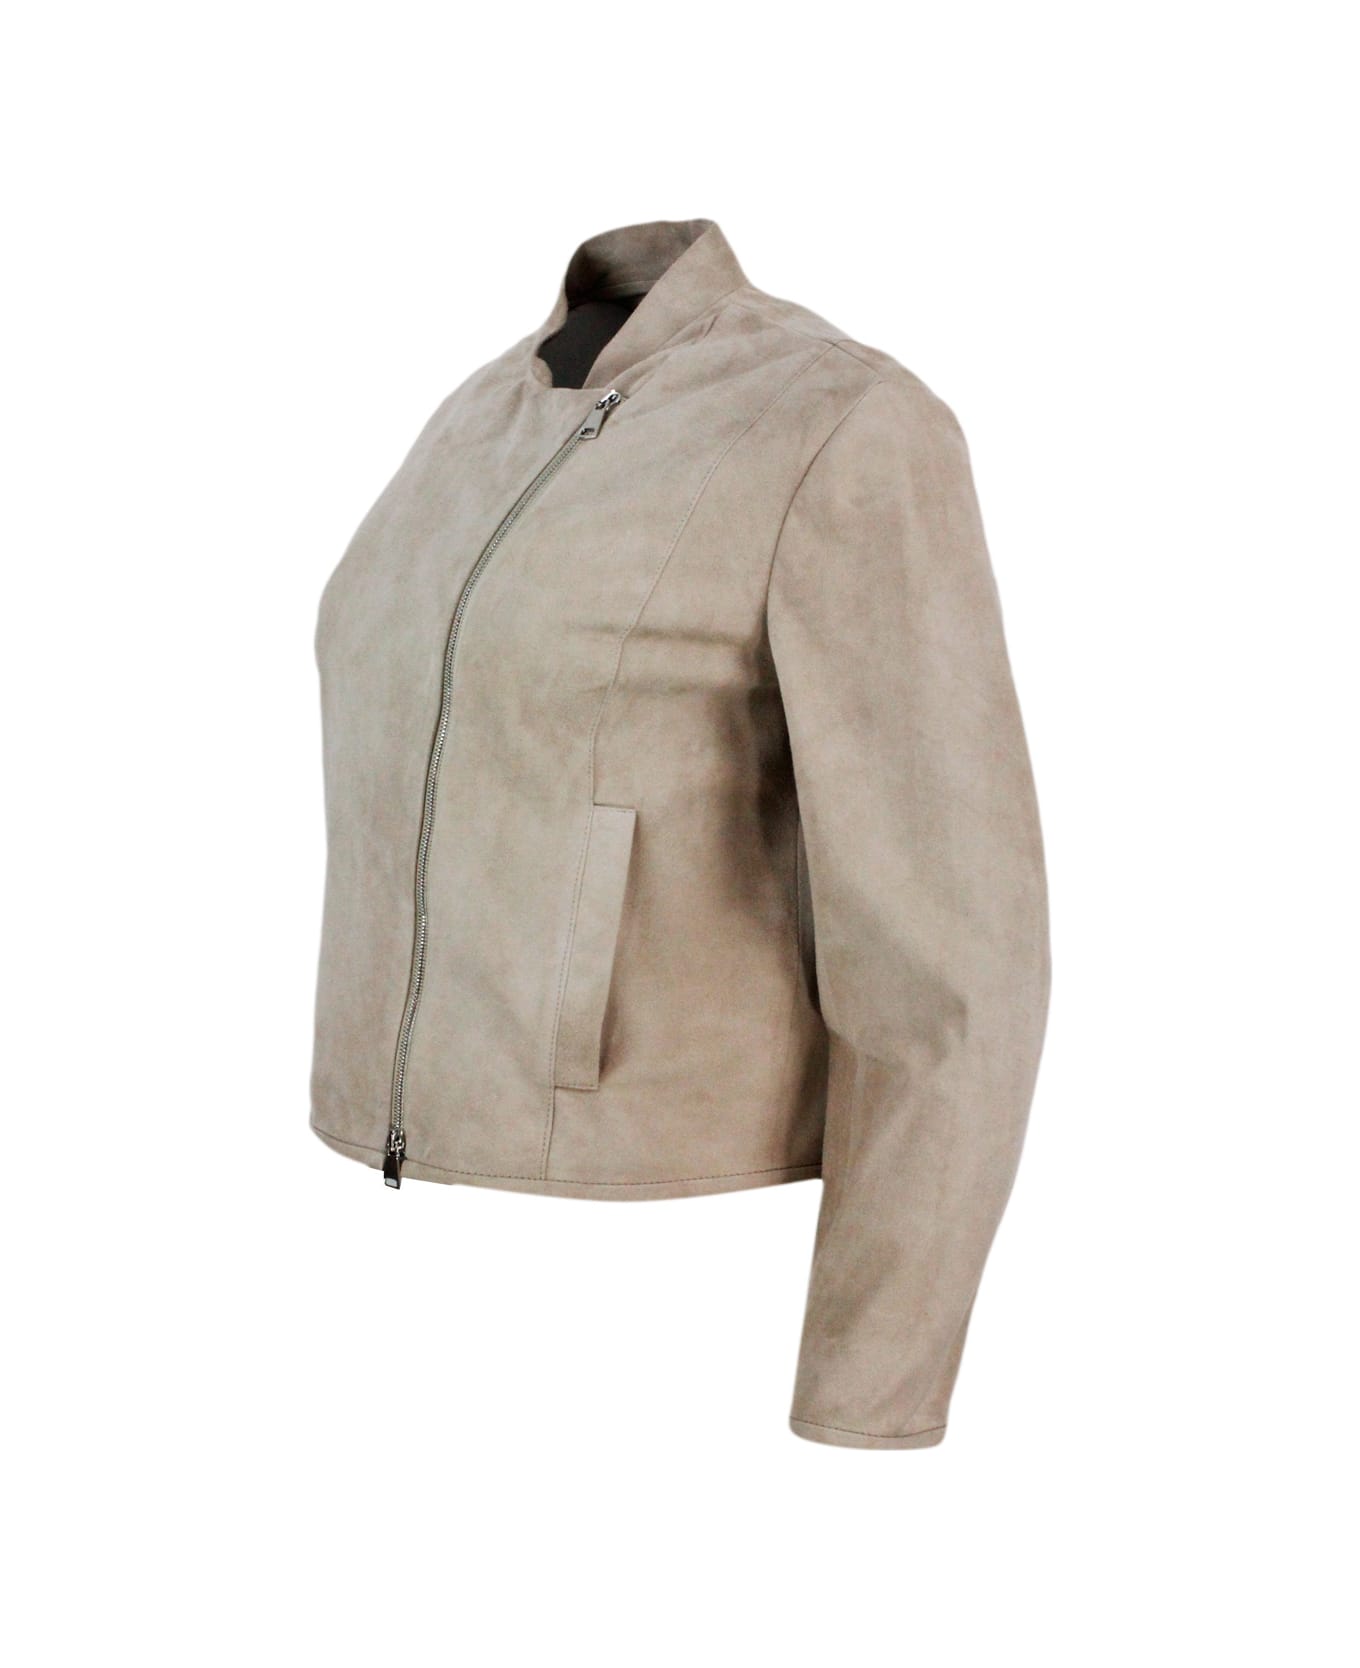 Antonelli Biker Jacket Made Of Soft Suede. Side Zip Closure And Pockets On The Front - Beige レザージャケット